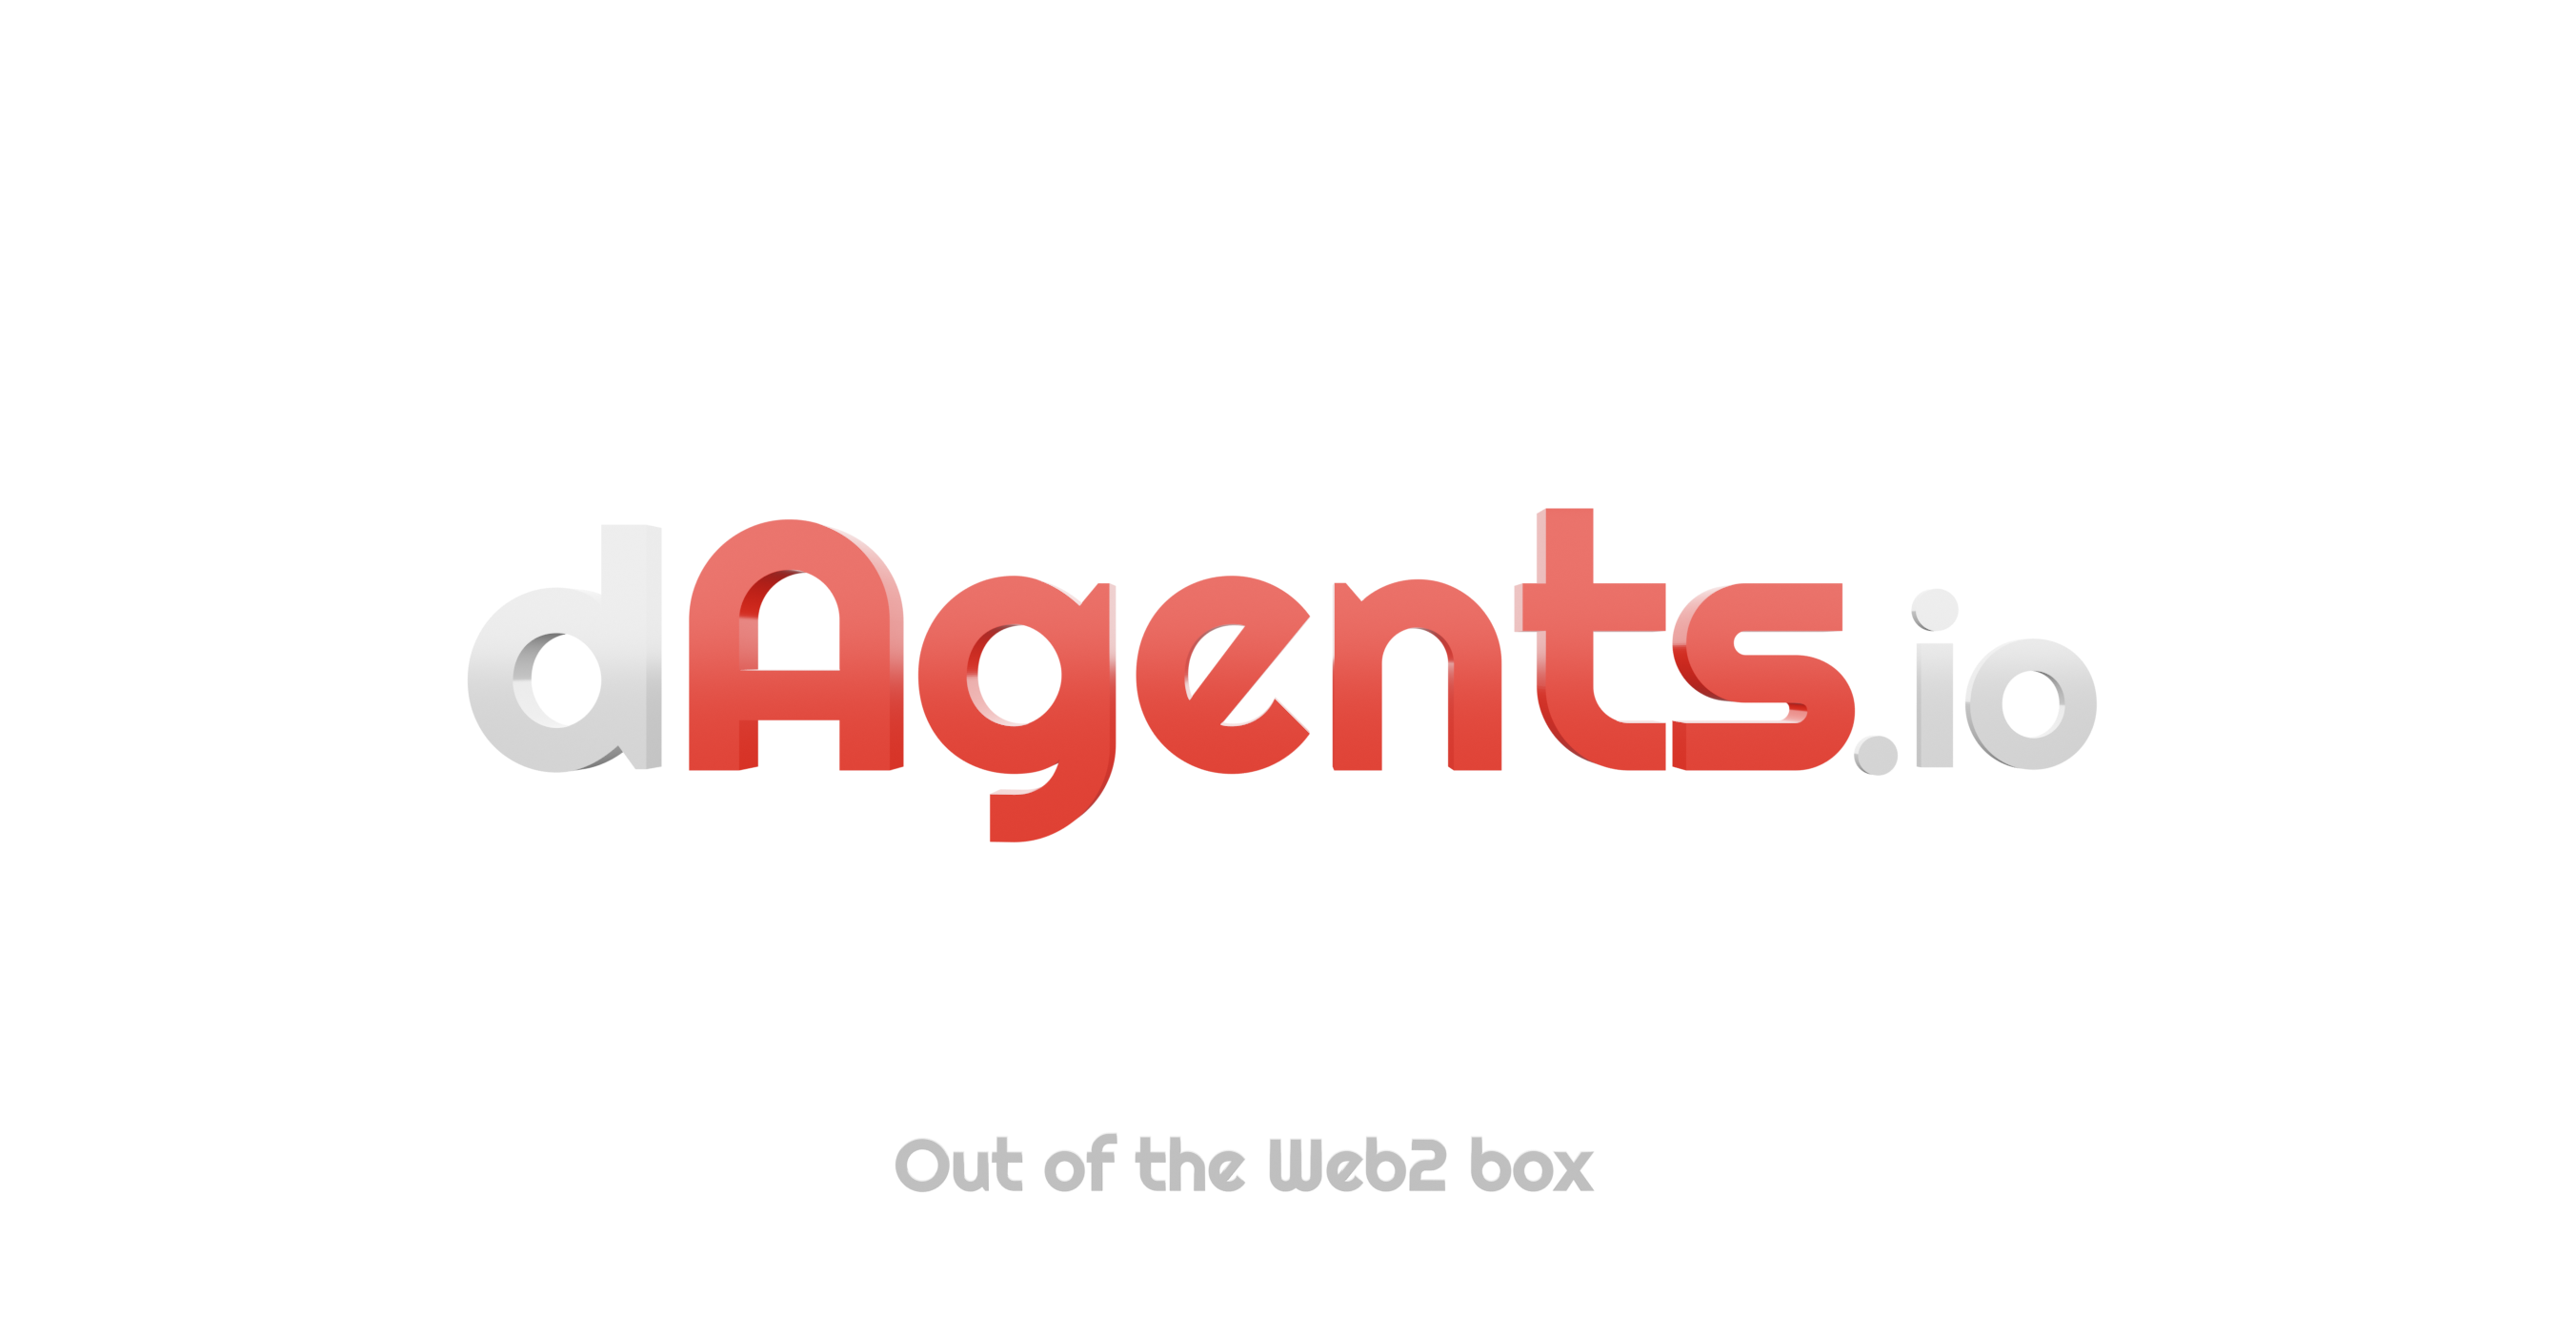 dAgents out of web2 box